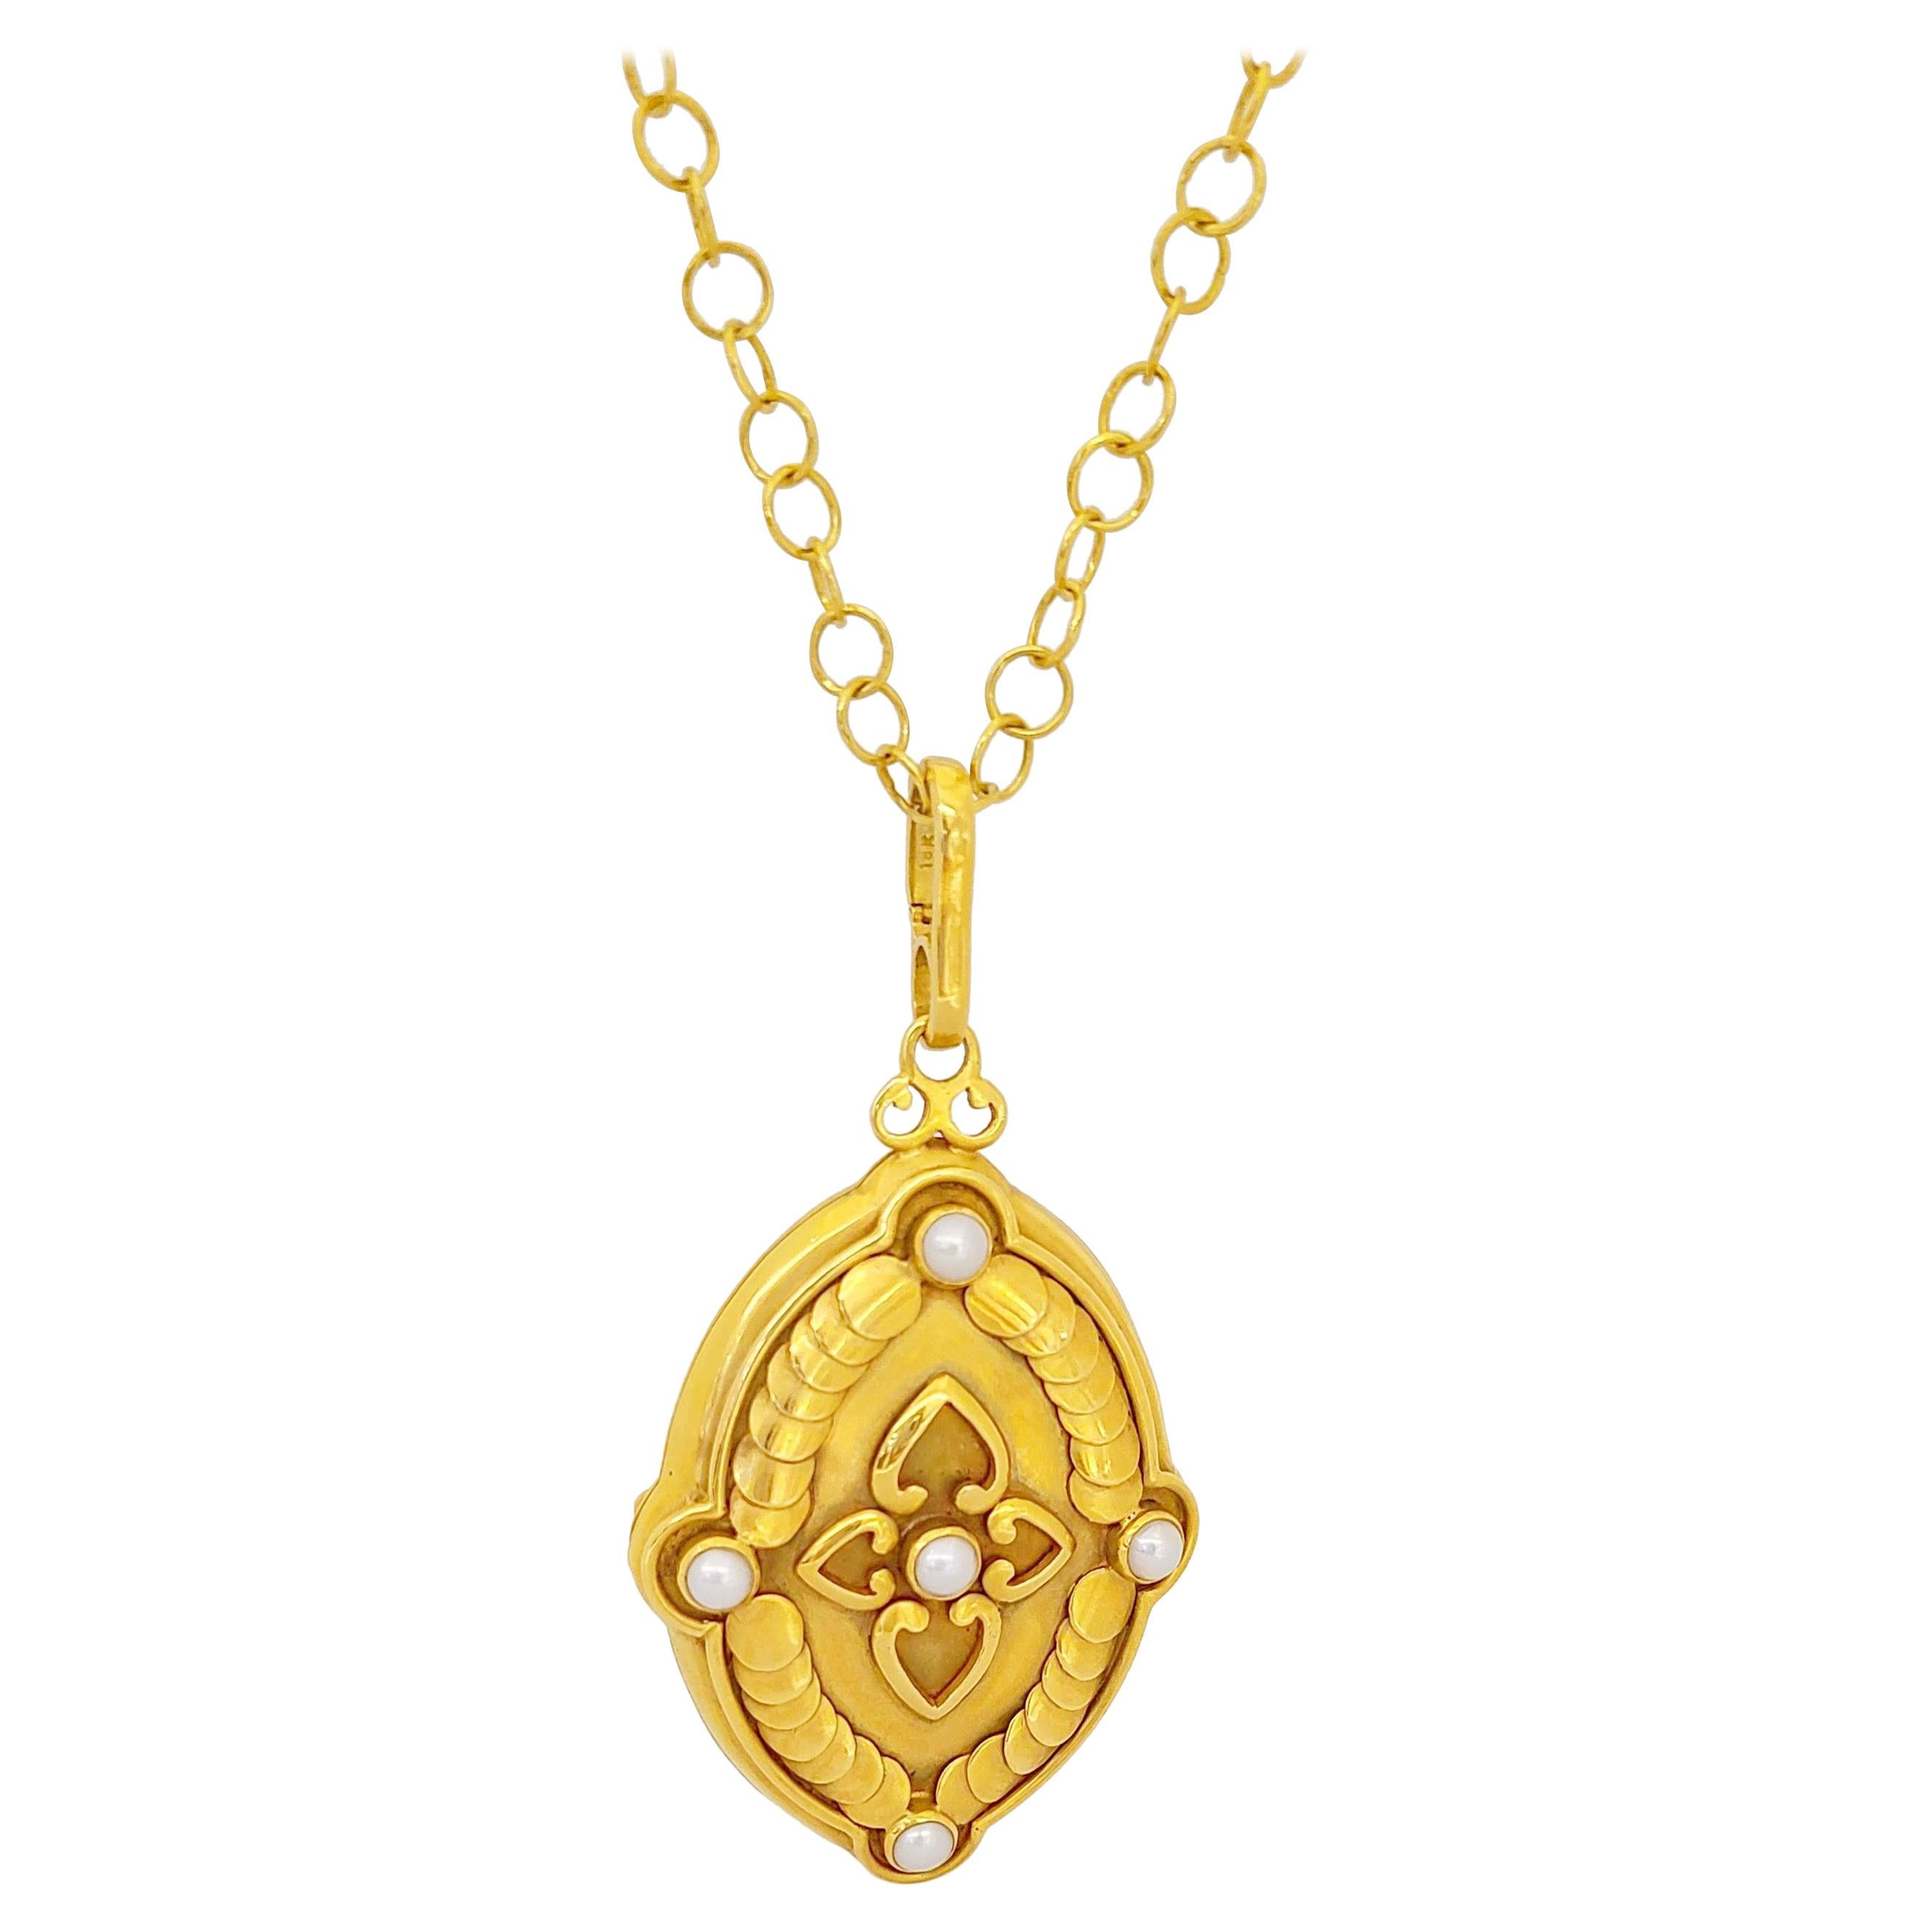 Julie Baker 18 Karat Yellow Gold Locket with Pearls with Open Link Chain For Sale